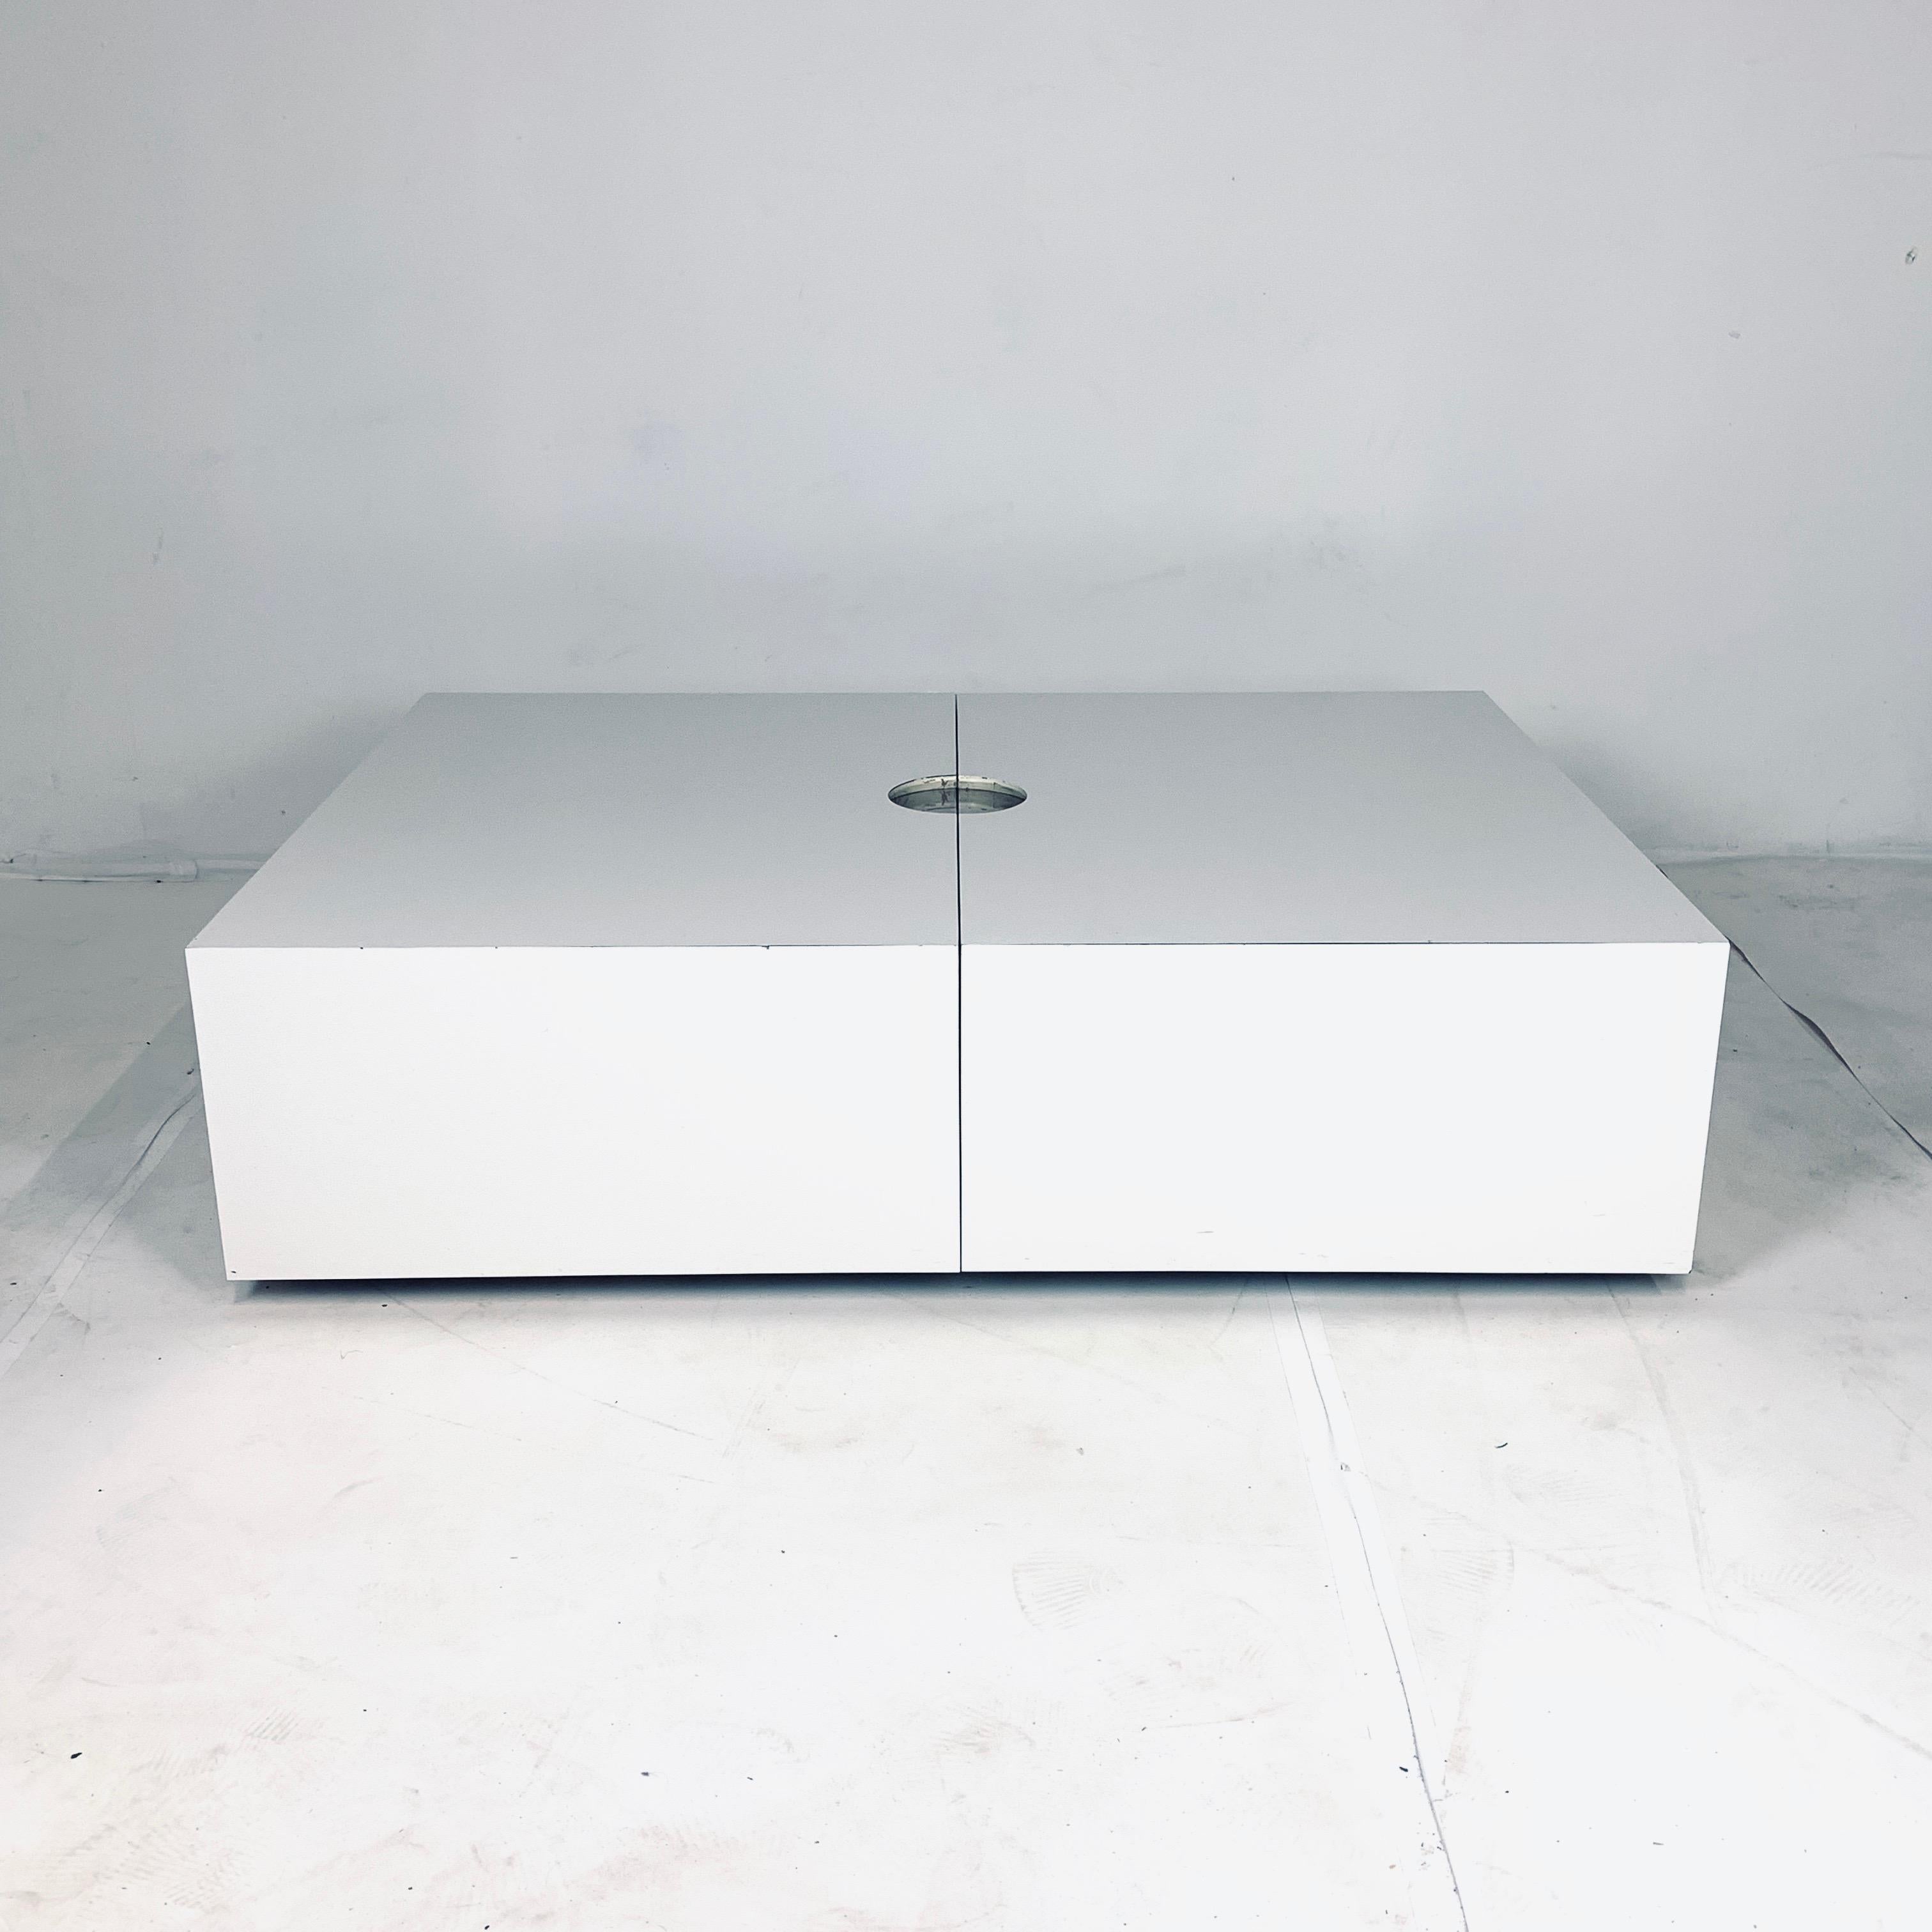 Laminate Monumental White & Stainless Op-Art Pop Convertible Storage / Bar / Coffee Table